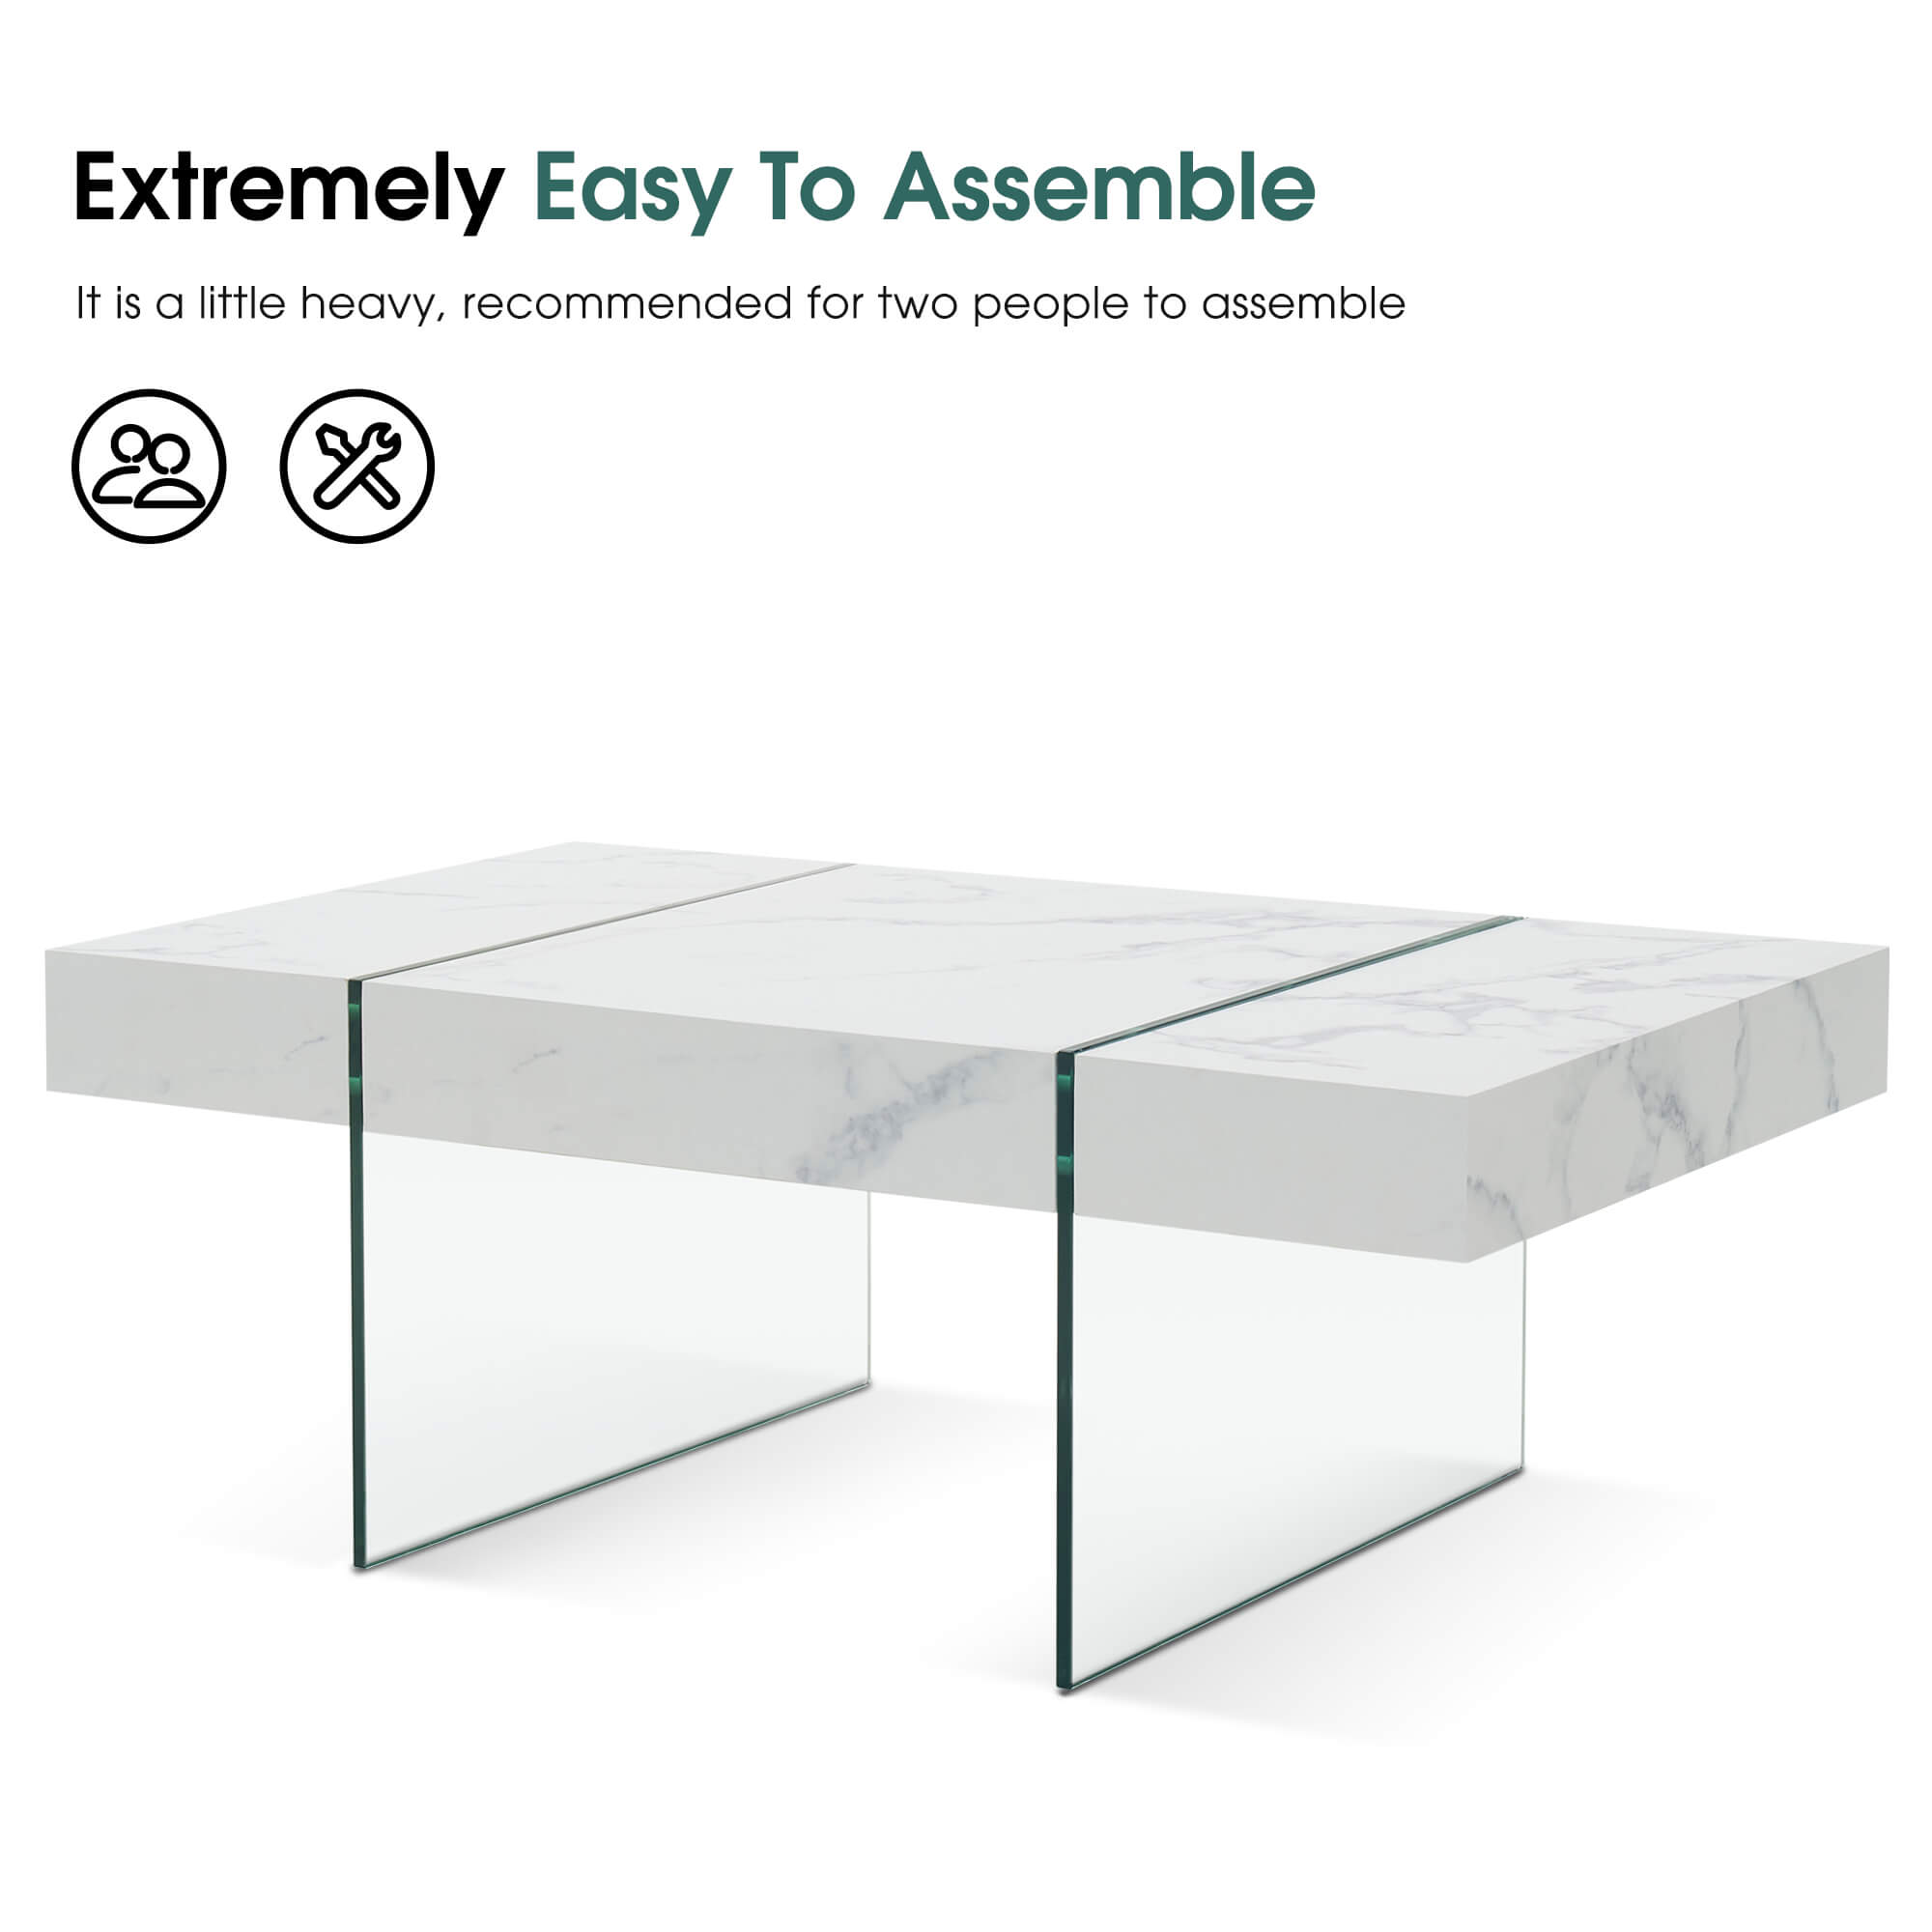 ivinta Rectangle Coffee Table, White High Gloss Coffee Table with Tempered Glass Legs